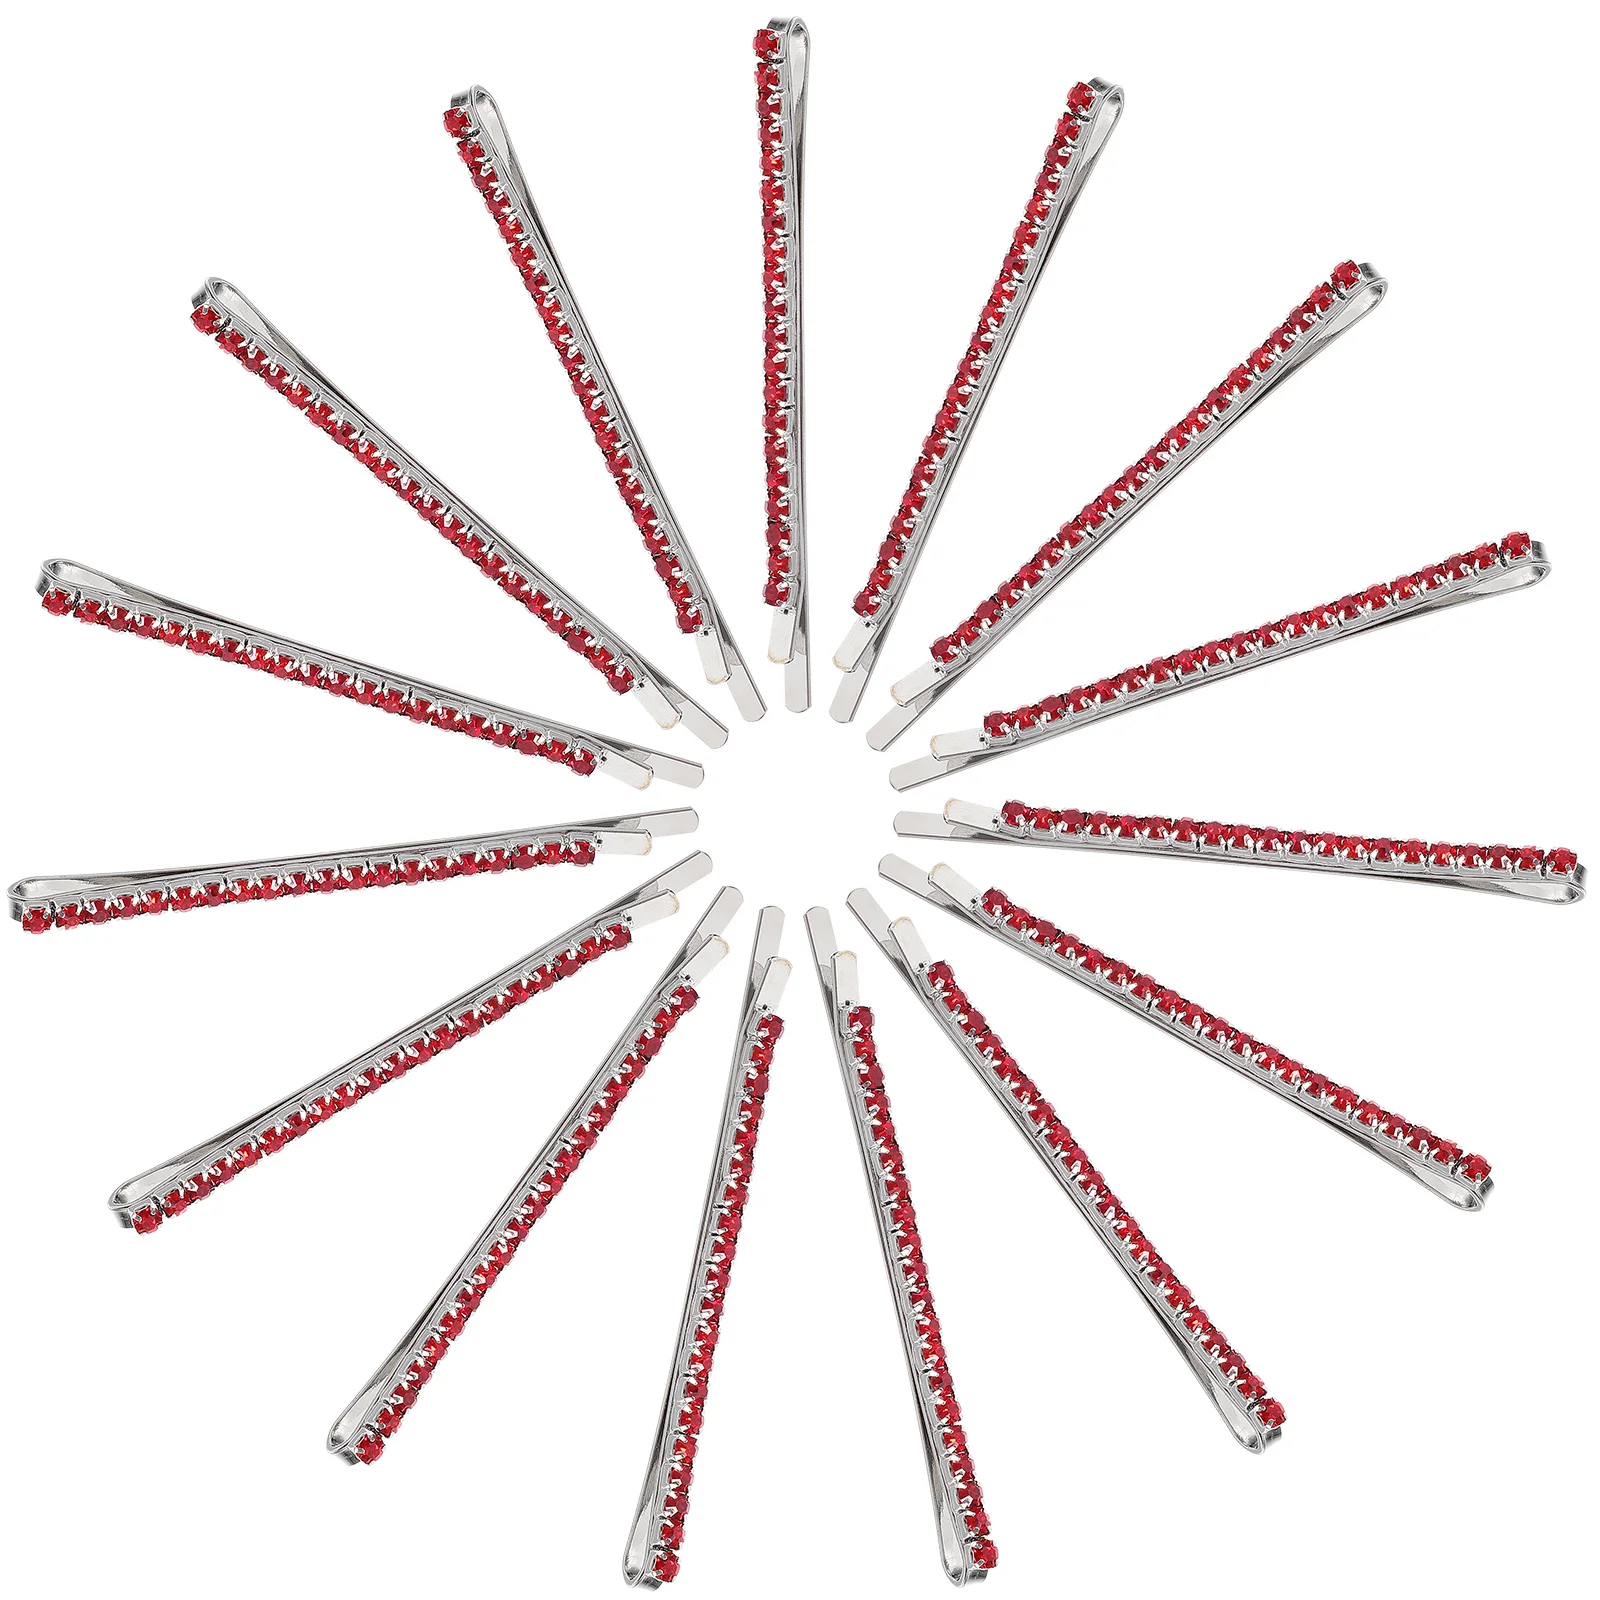 

15 Pcs Hair Accessories for Women Wedding Bobby Pins Red Rhinestone Hairpin Barrettes Clips